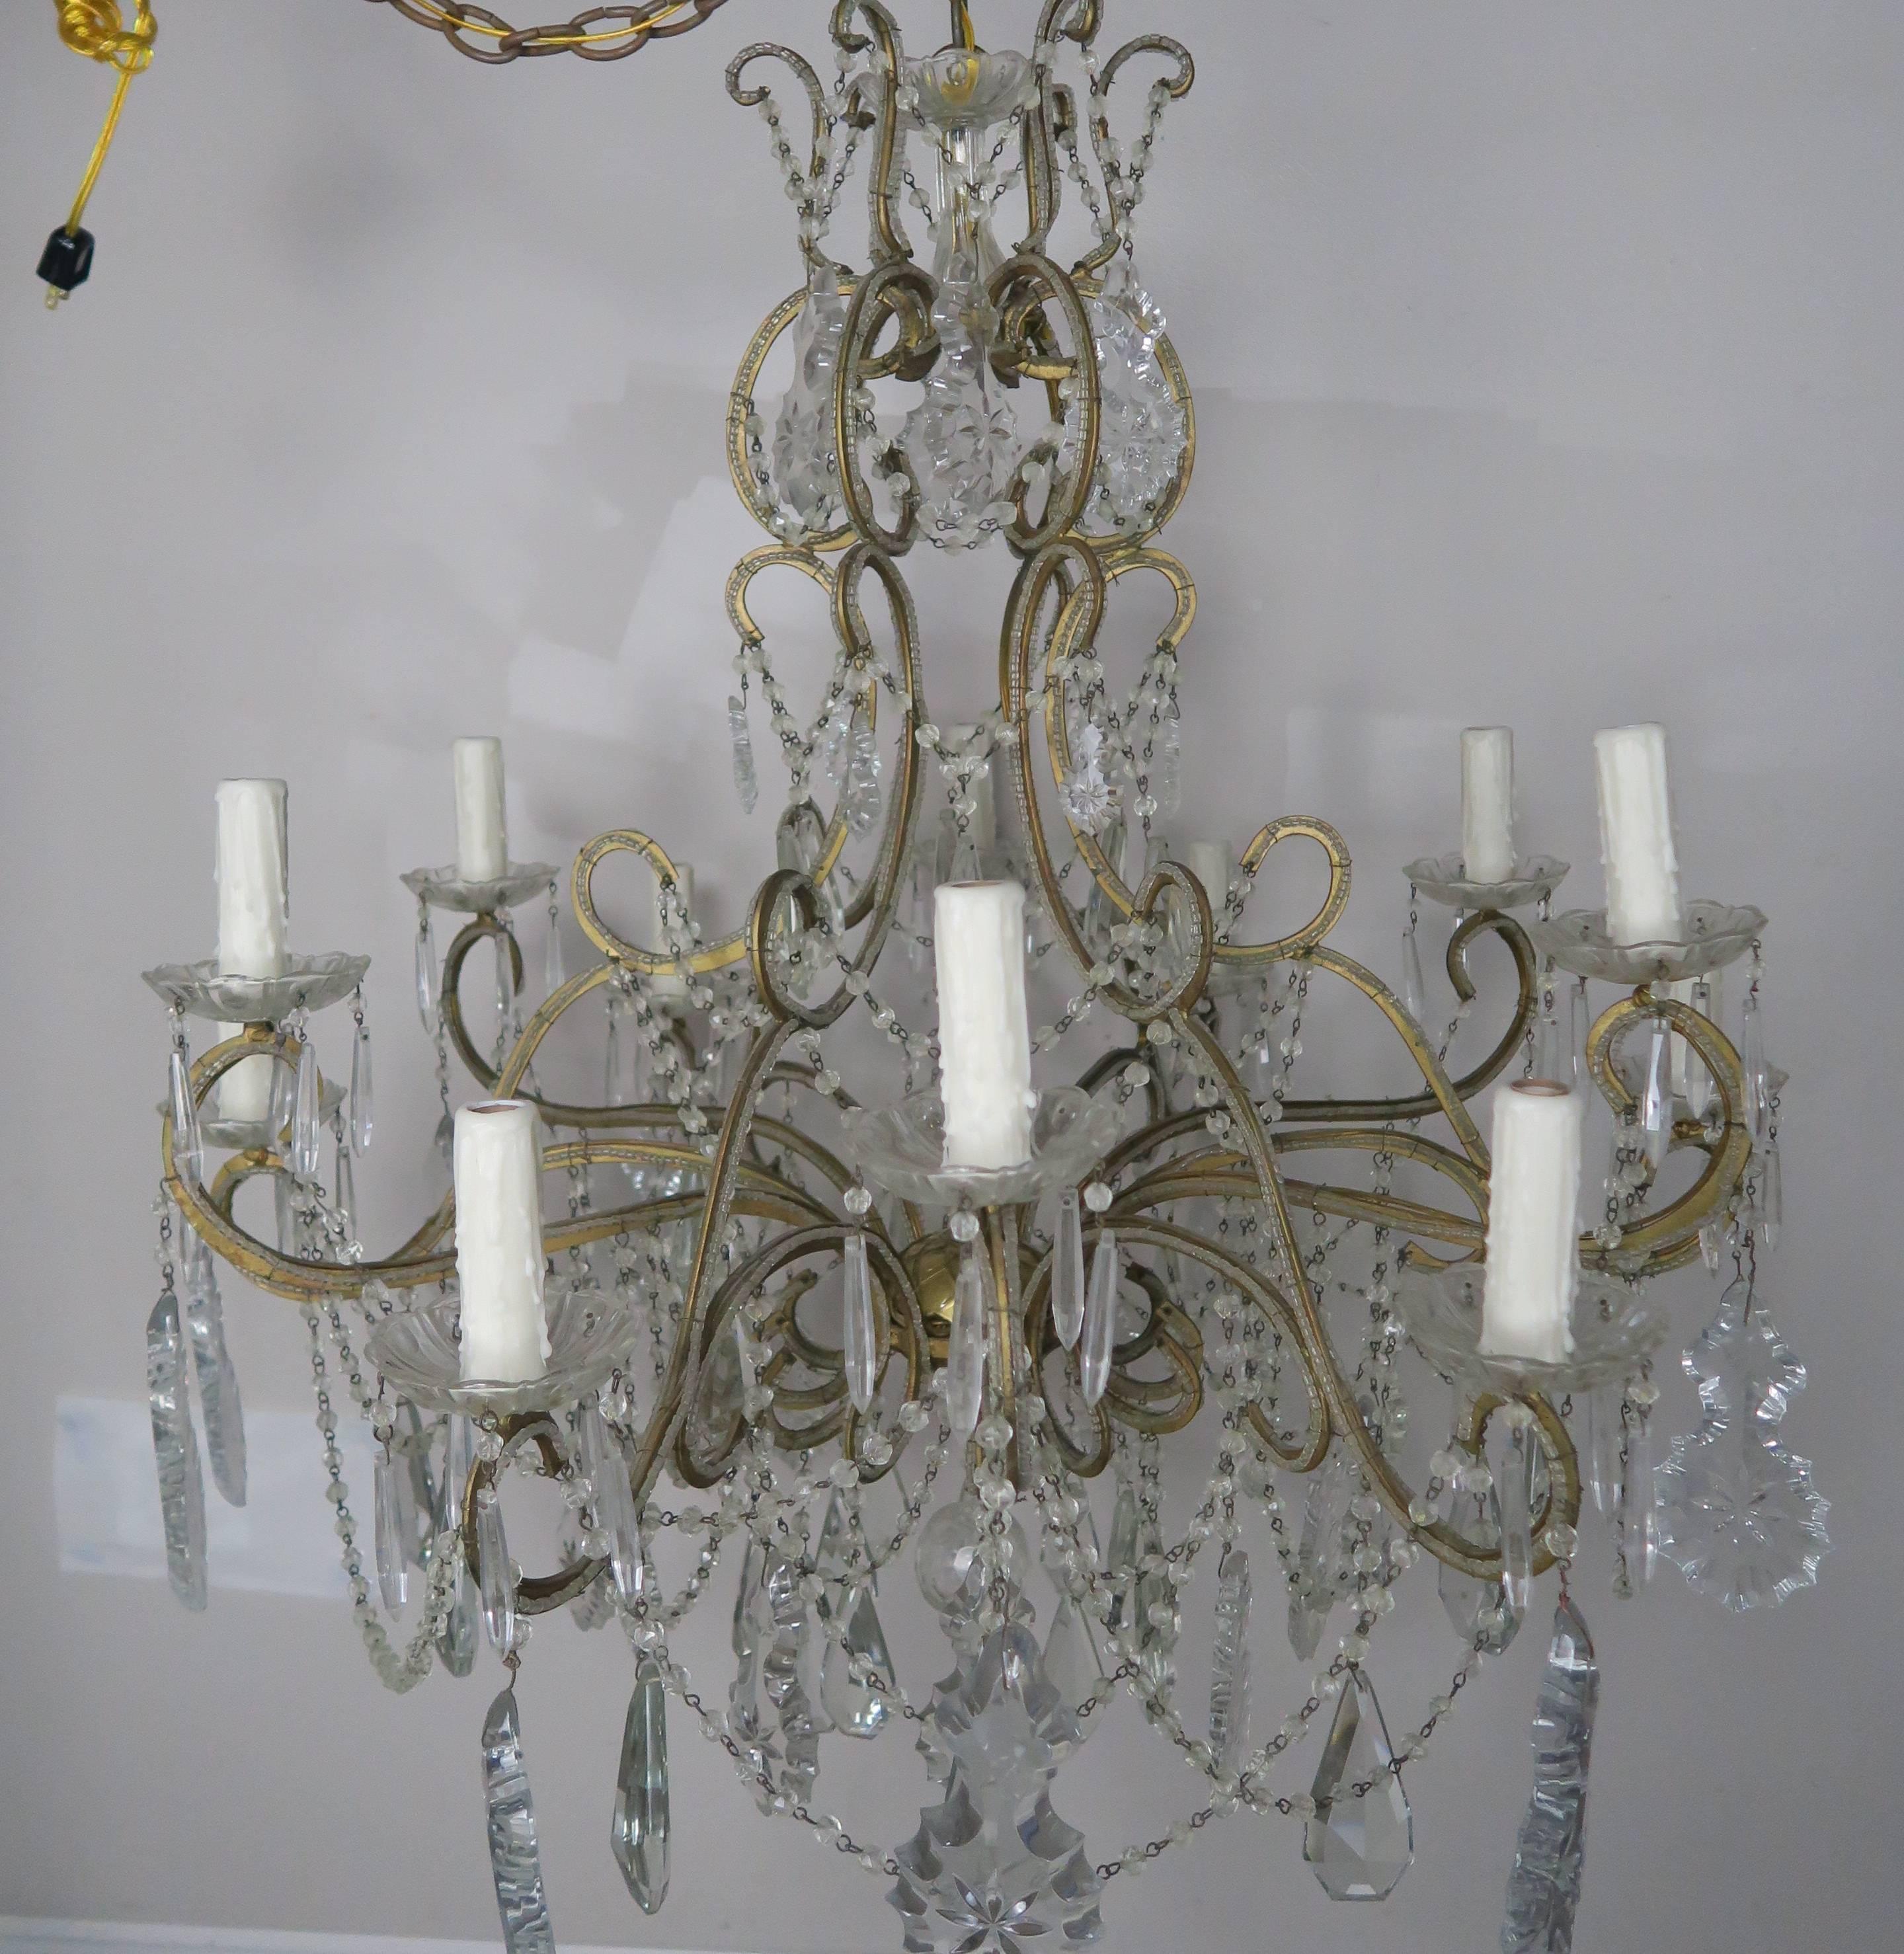 French twelve-light double tier crystal beaded gilt metal chandelier adorned with star cut crystals and strands of crystal garlands throughout. The fixture has been newly rewired with drip wax candle covers. Includes chain and canopy.